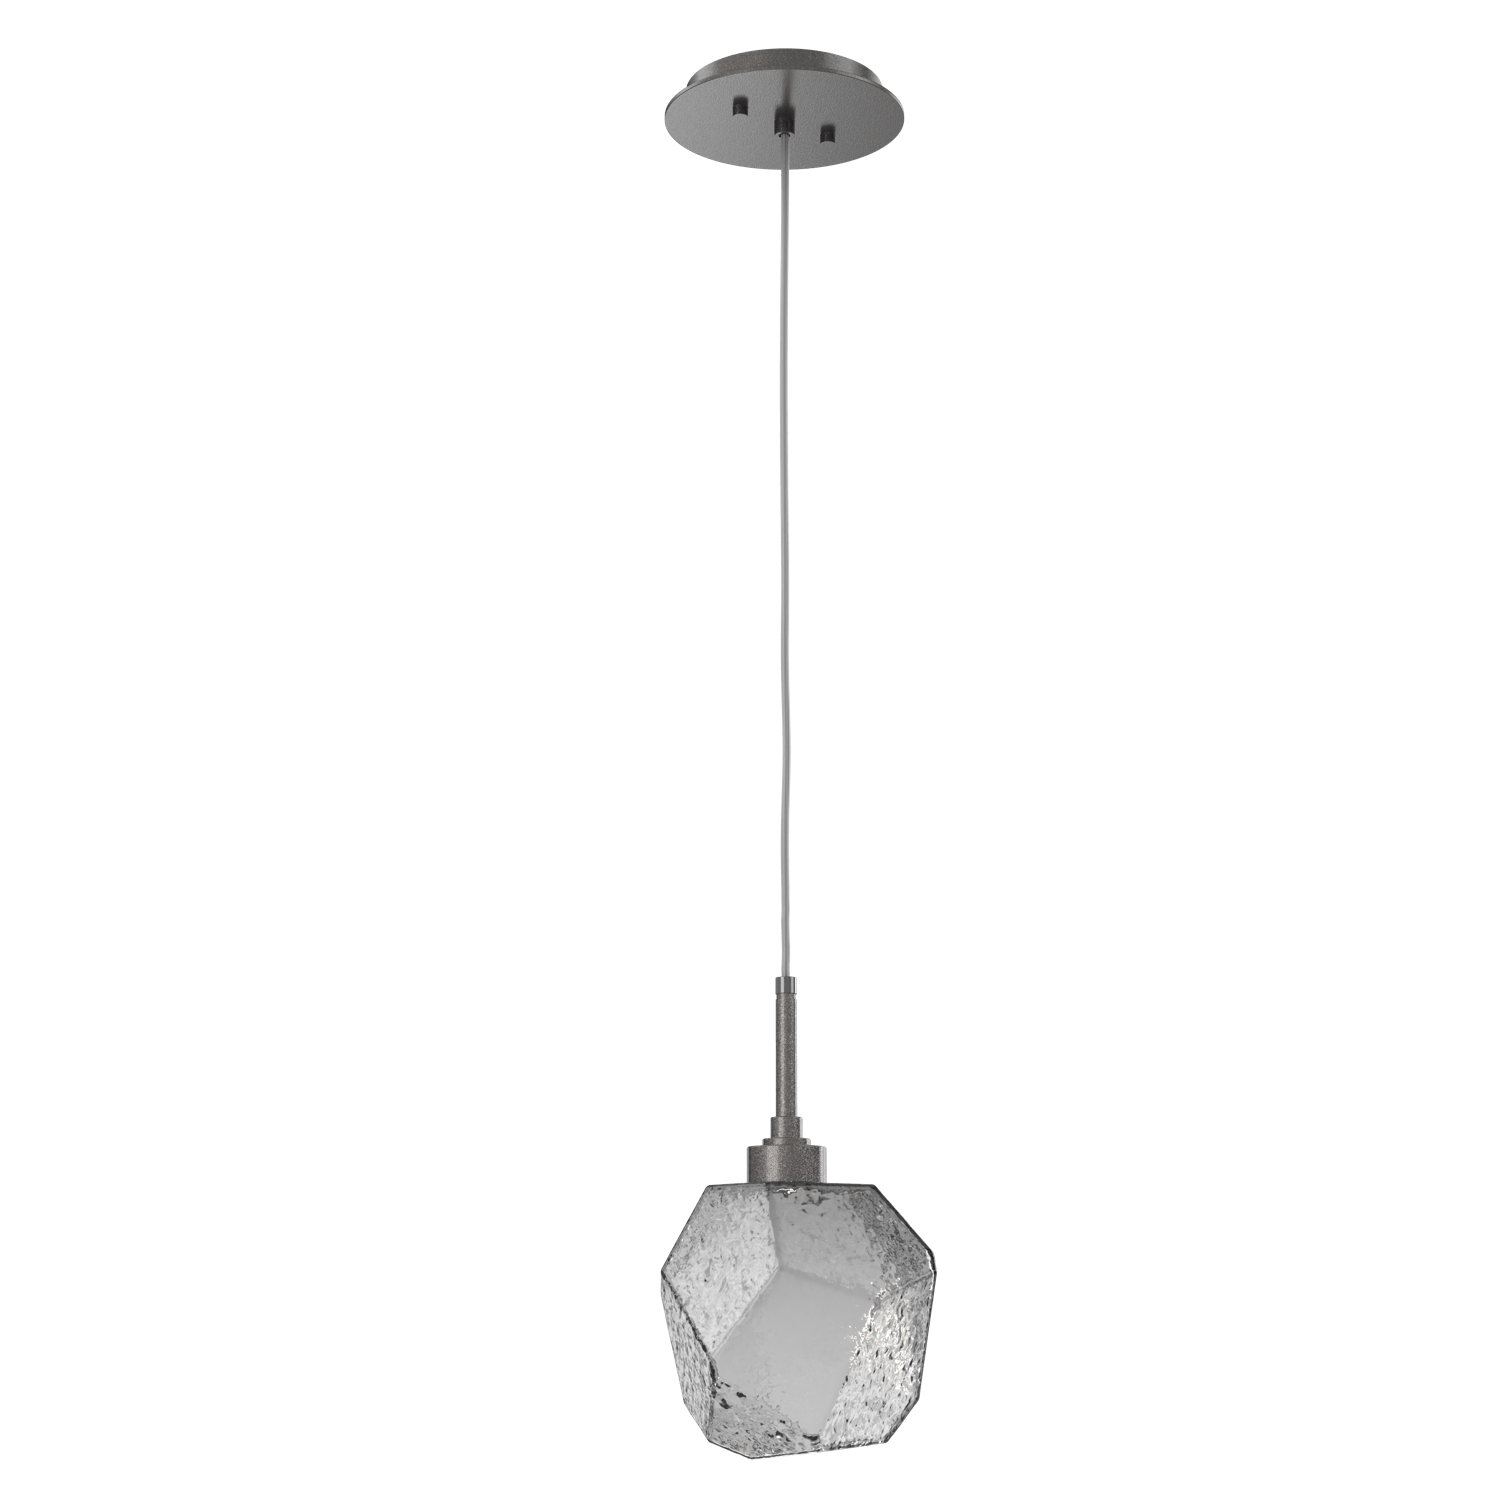 LAB0039-01-GP-S-Hammerton-Studio-Gem-pendant-light-with-graphite-finish-and-smoke-blown-glass-shades-and-LED-lamping